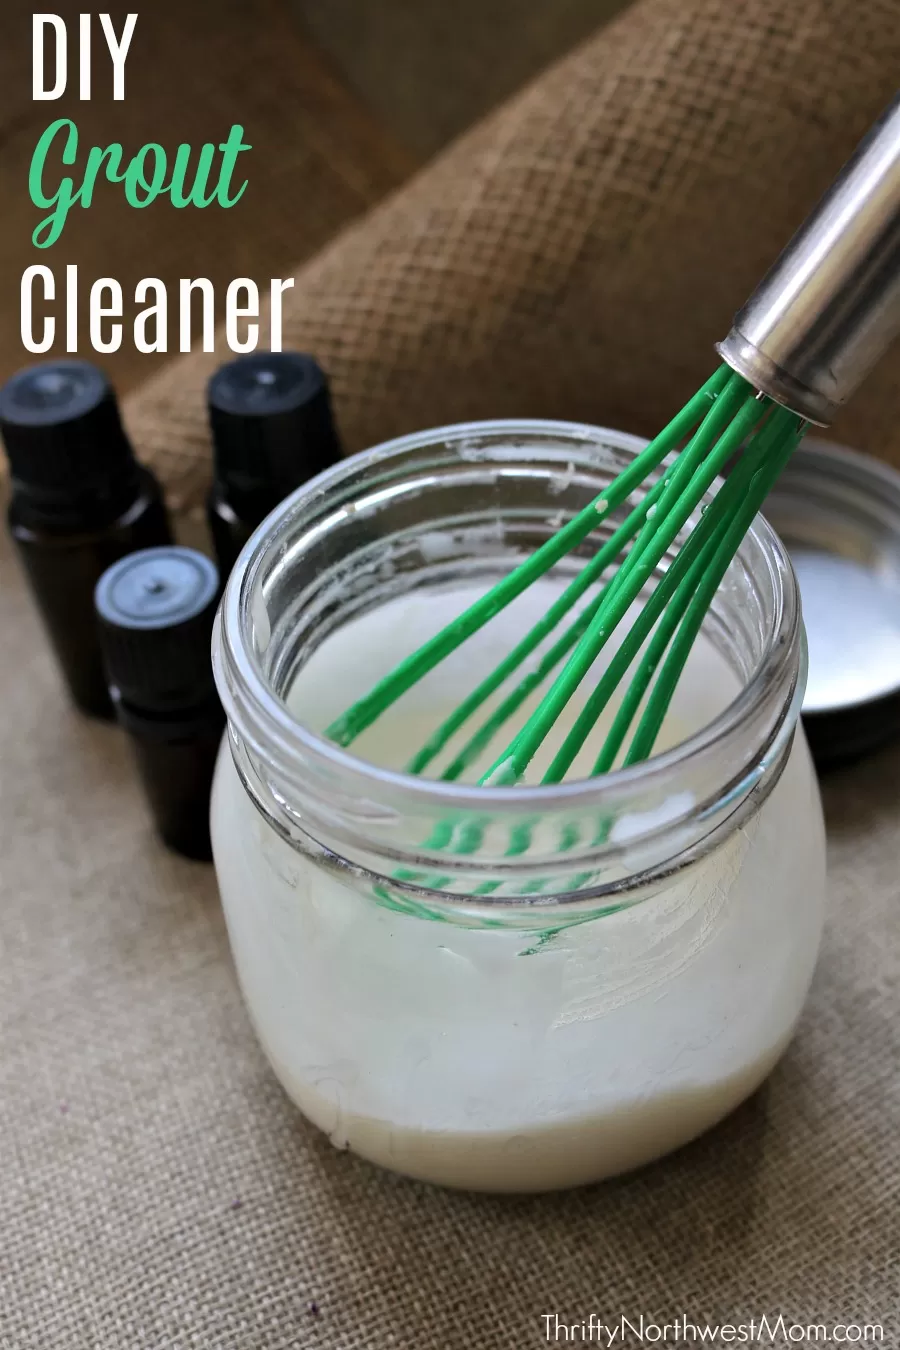 Try this DIY Homemade Grout Cleaner for a frugal, natural option for cleaning your bathroom tiles